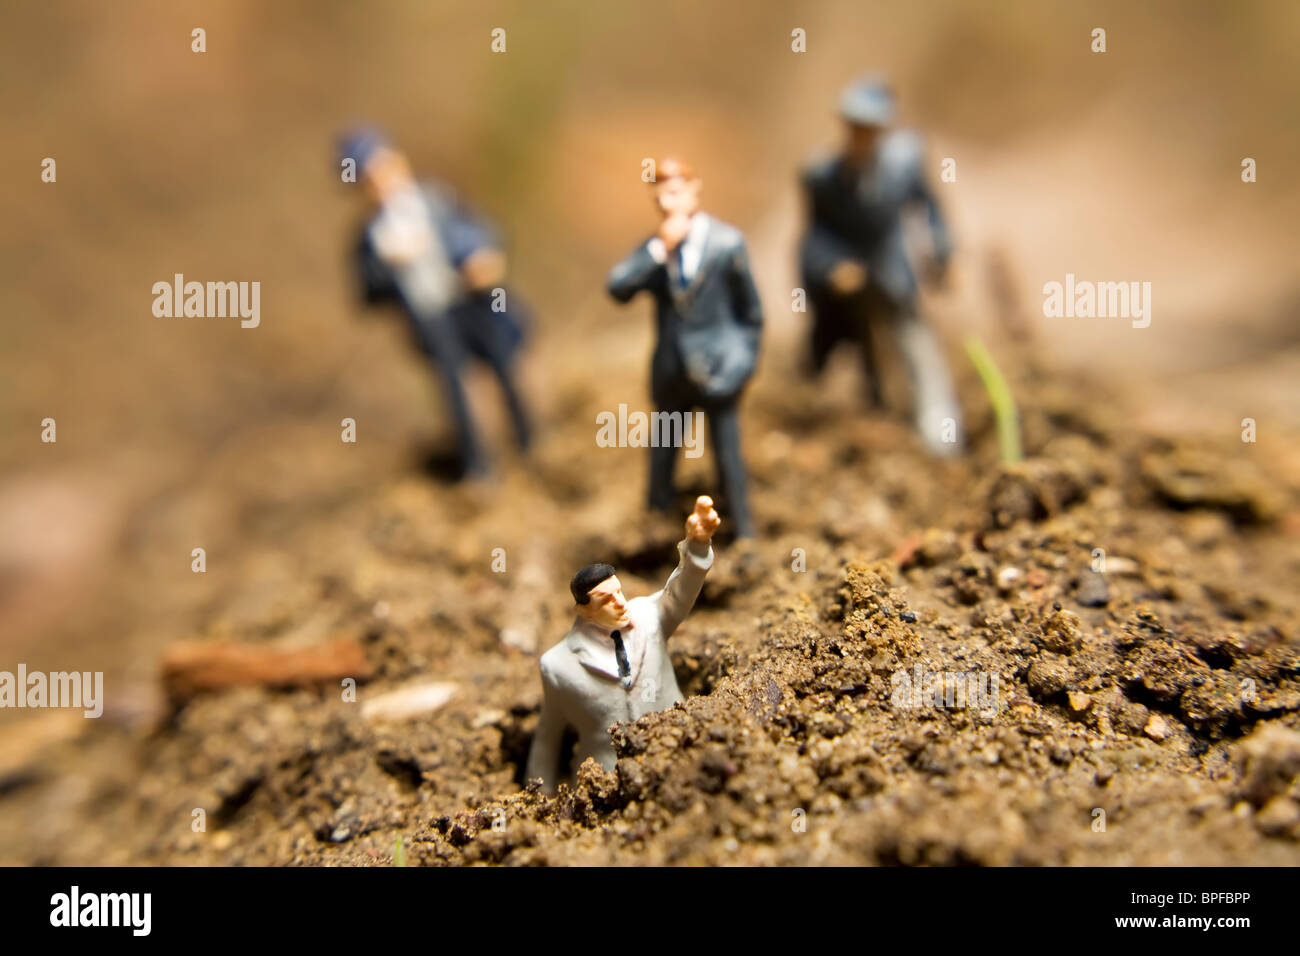 Business figurines placed outside in the dirt Stock Photo